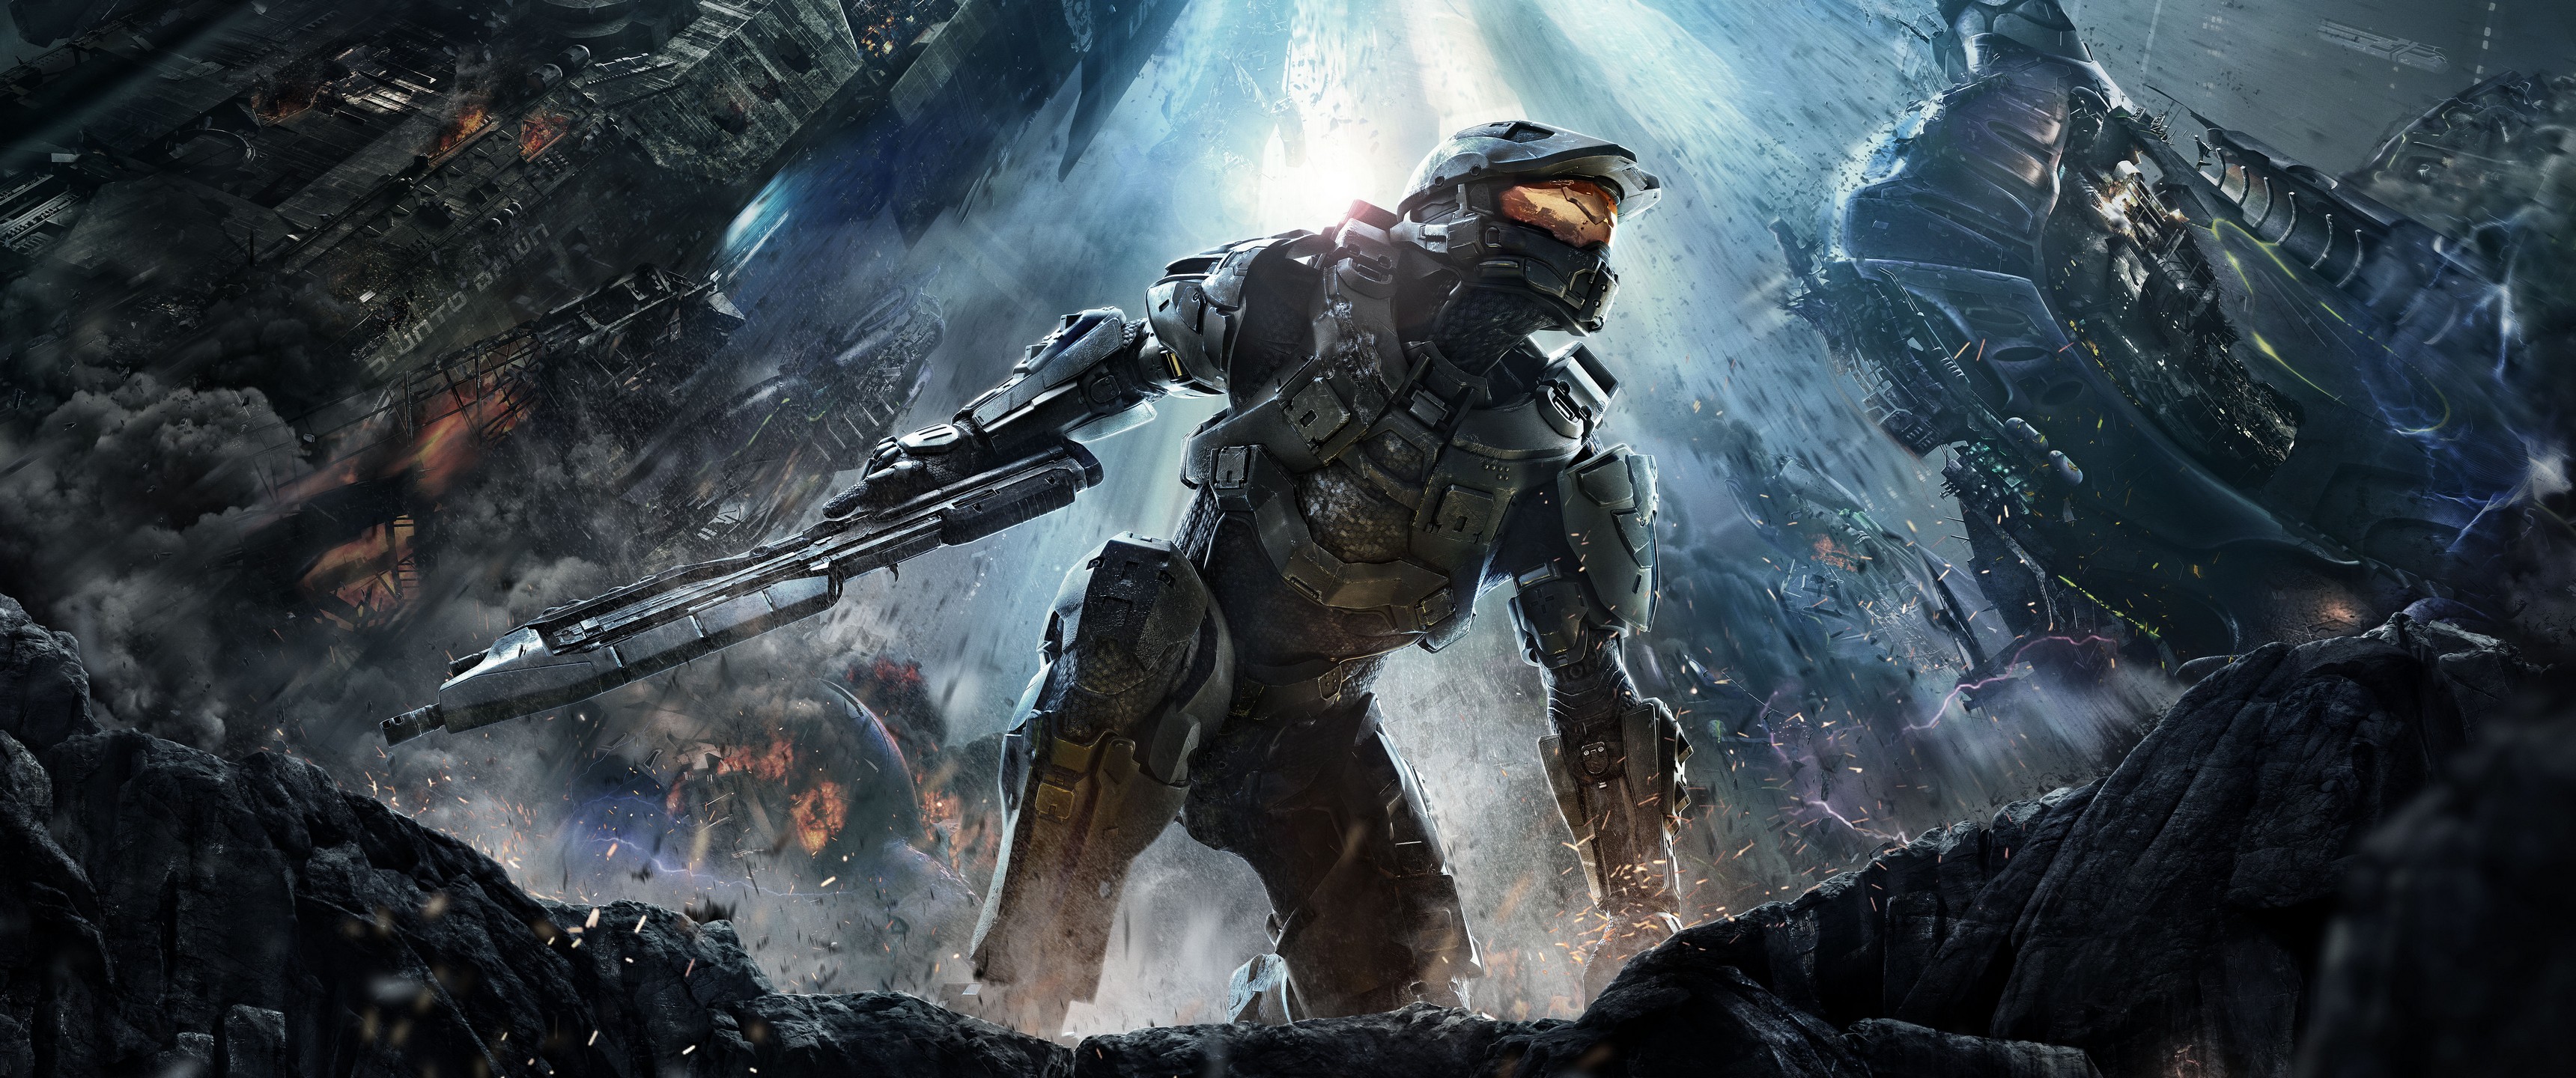 General 3440x1440 Halo (game) Halo 4 low-angle video games video game art video game men Science Fiction Men science fiction weapon Master Chief (Halo) armor futuristic Futuristic Weapons